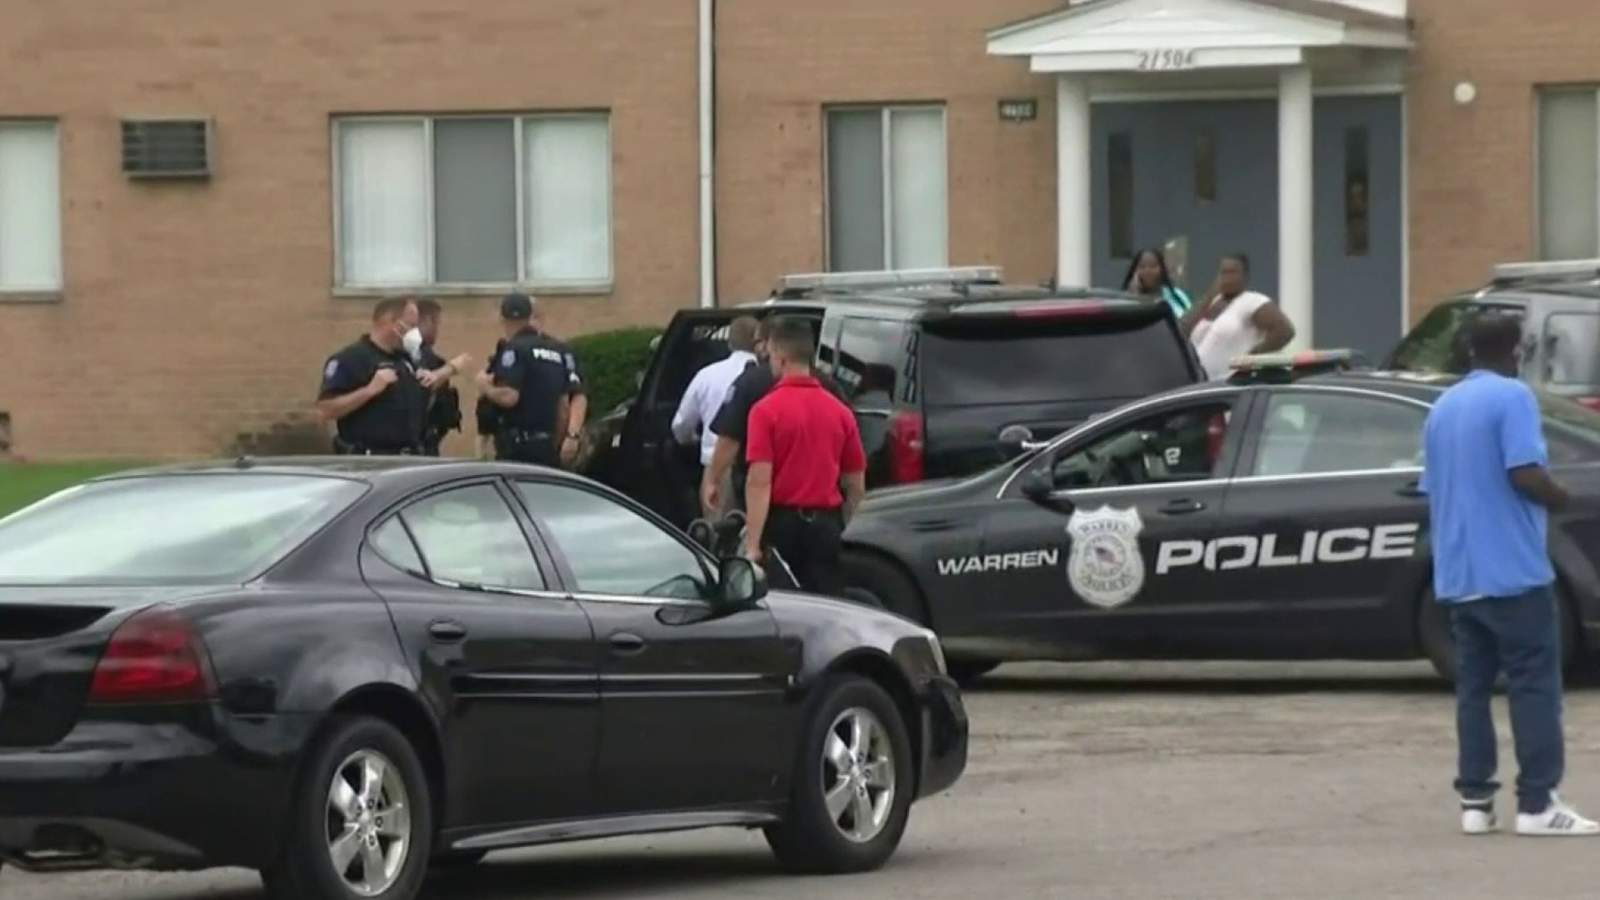 Police investigate 10-year-old shot, killed at Warren apartment complex